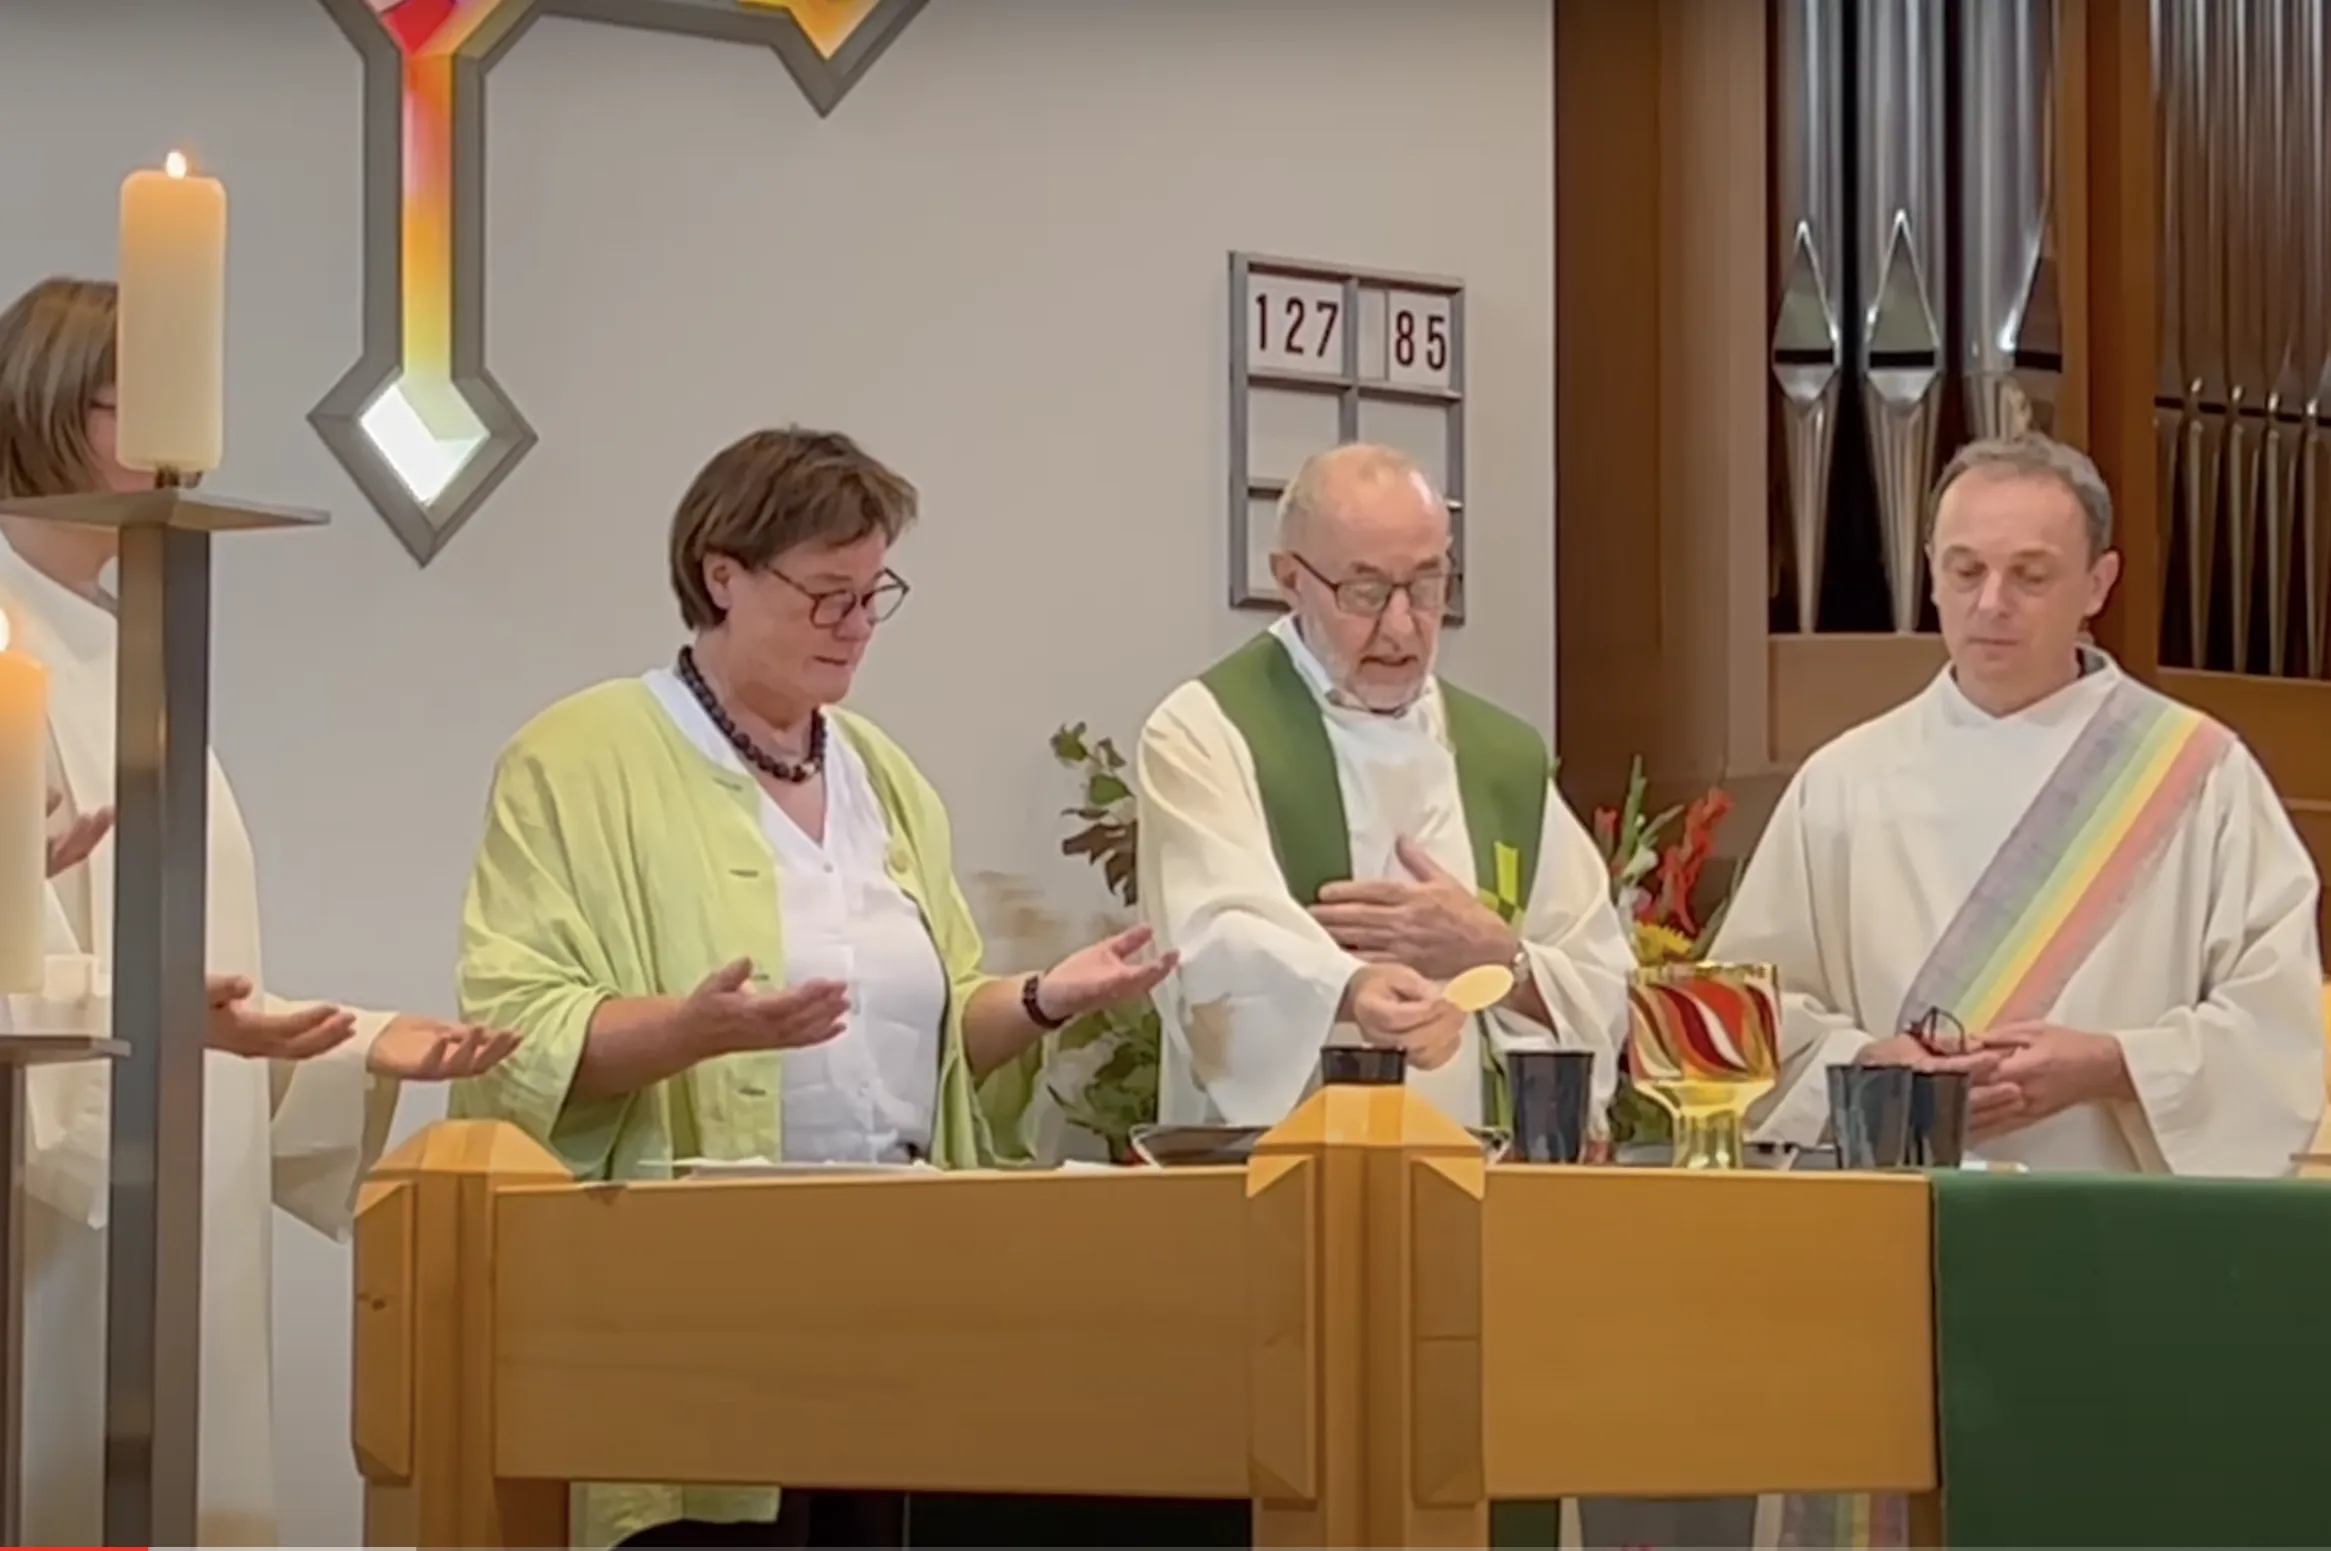 The bishops' call for adherence to Catholic "rules" follows an internet controversy over a August 2022 video of a laywoman who seemed to concelebrate Mass with priests.?w=200&h=150